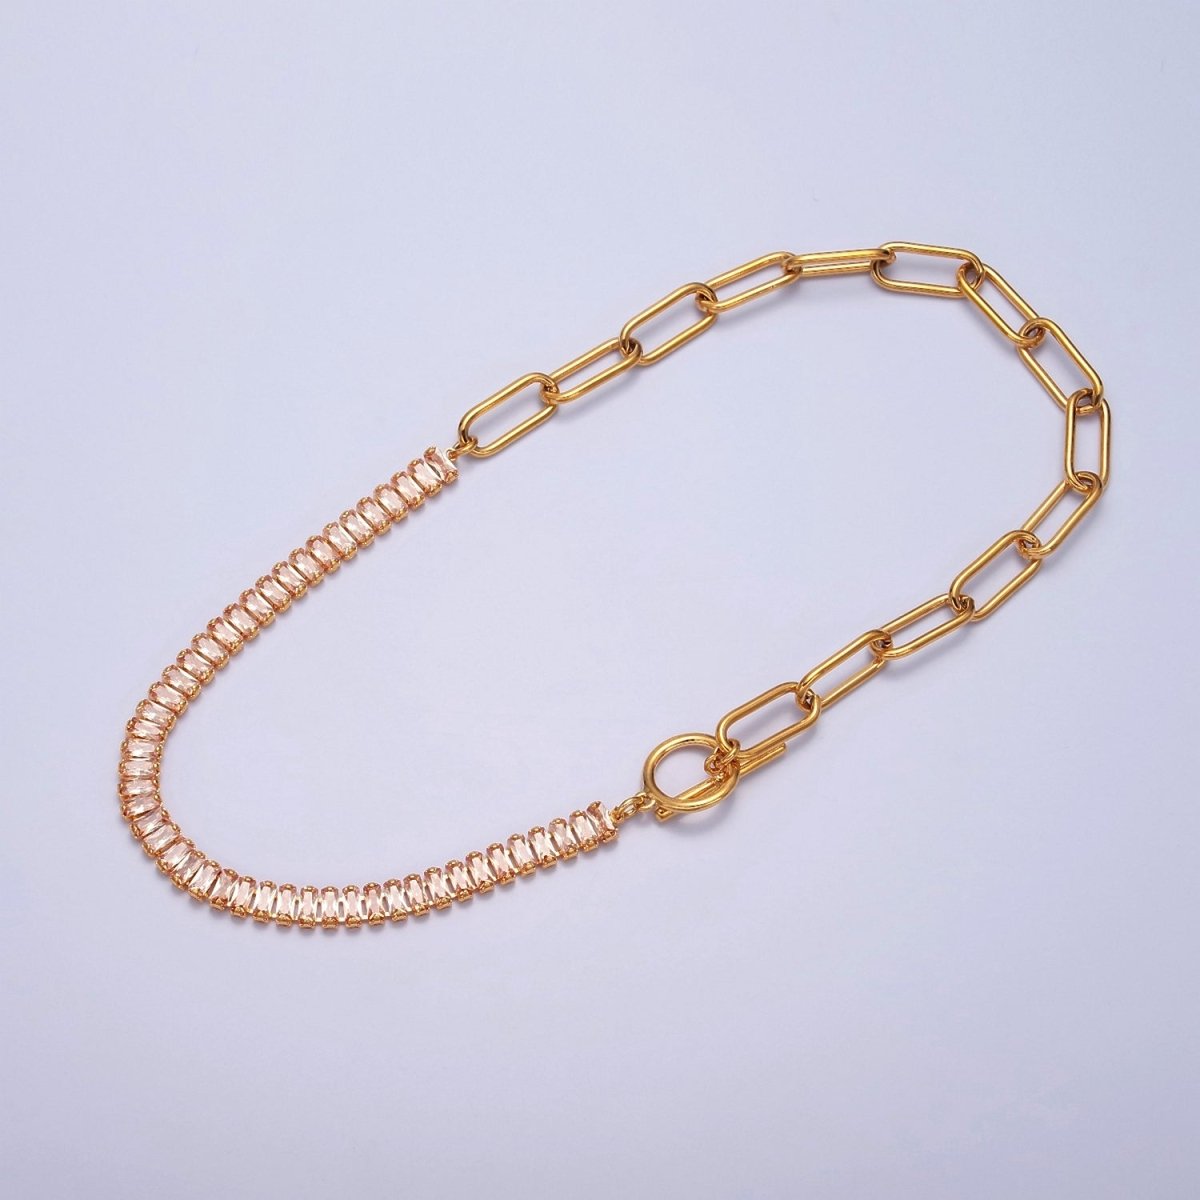 Minimalist Tennis Baguette Necklace 24k gold Filled CZ paperclip chain necklace, large link tennis chain | WA-947 WA-948 Clearance Pricing - DLUXCA